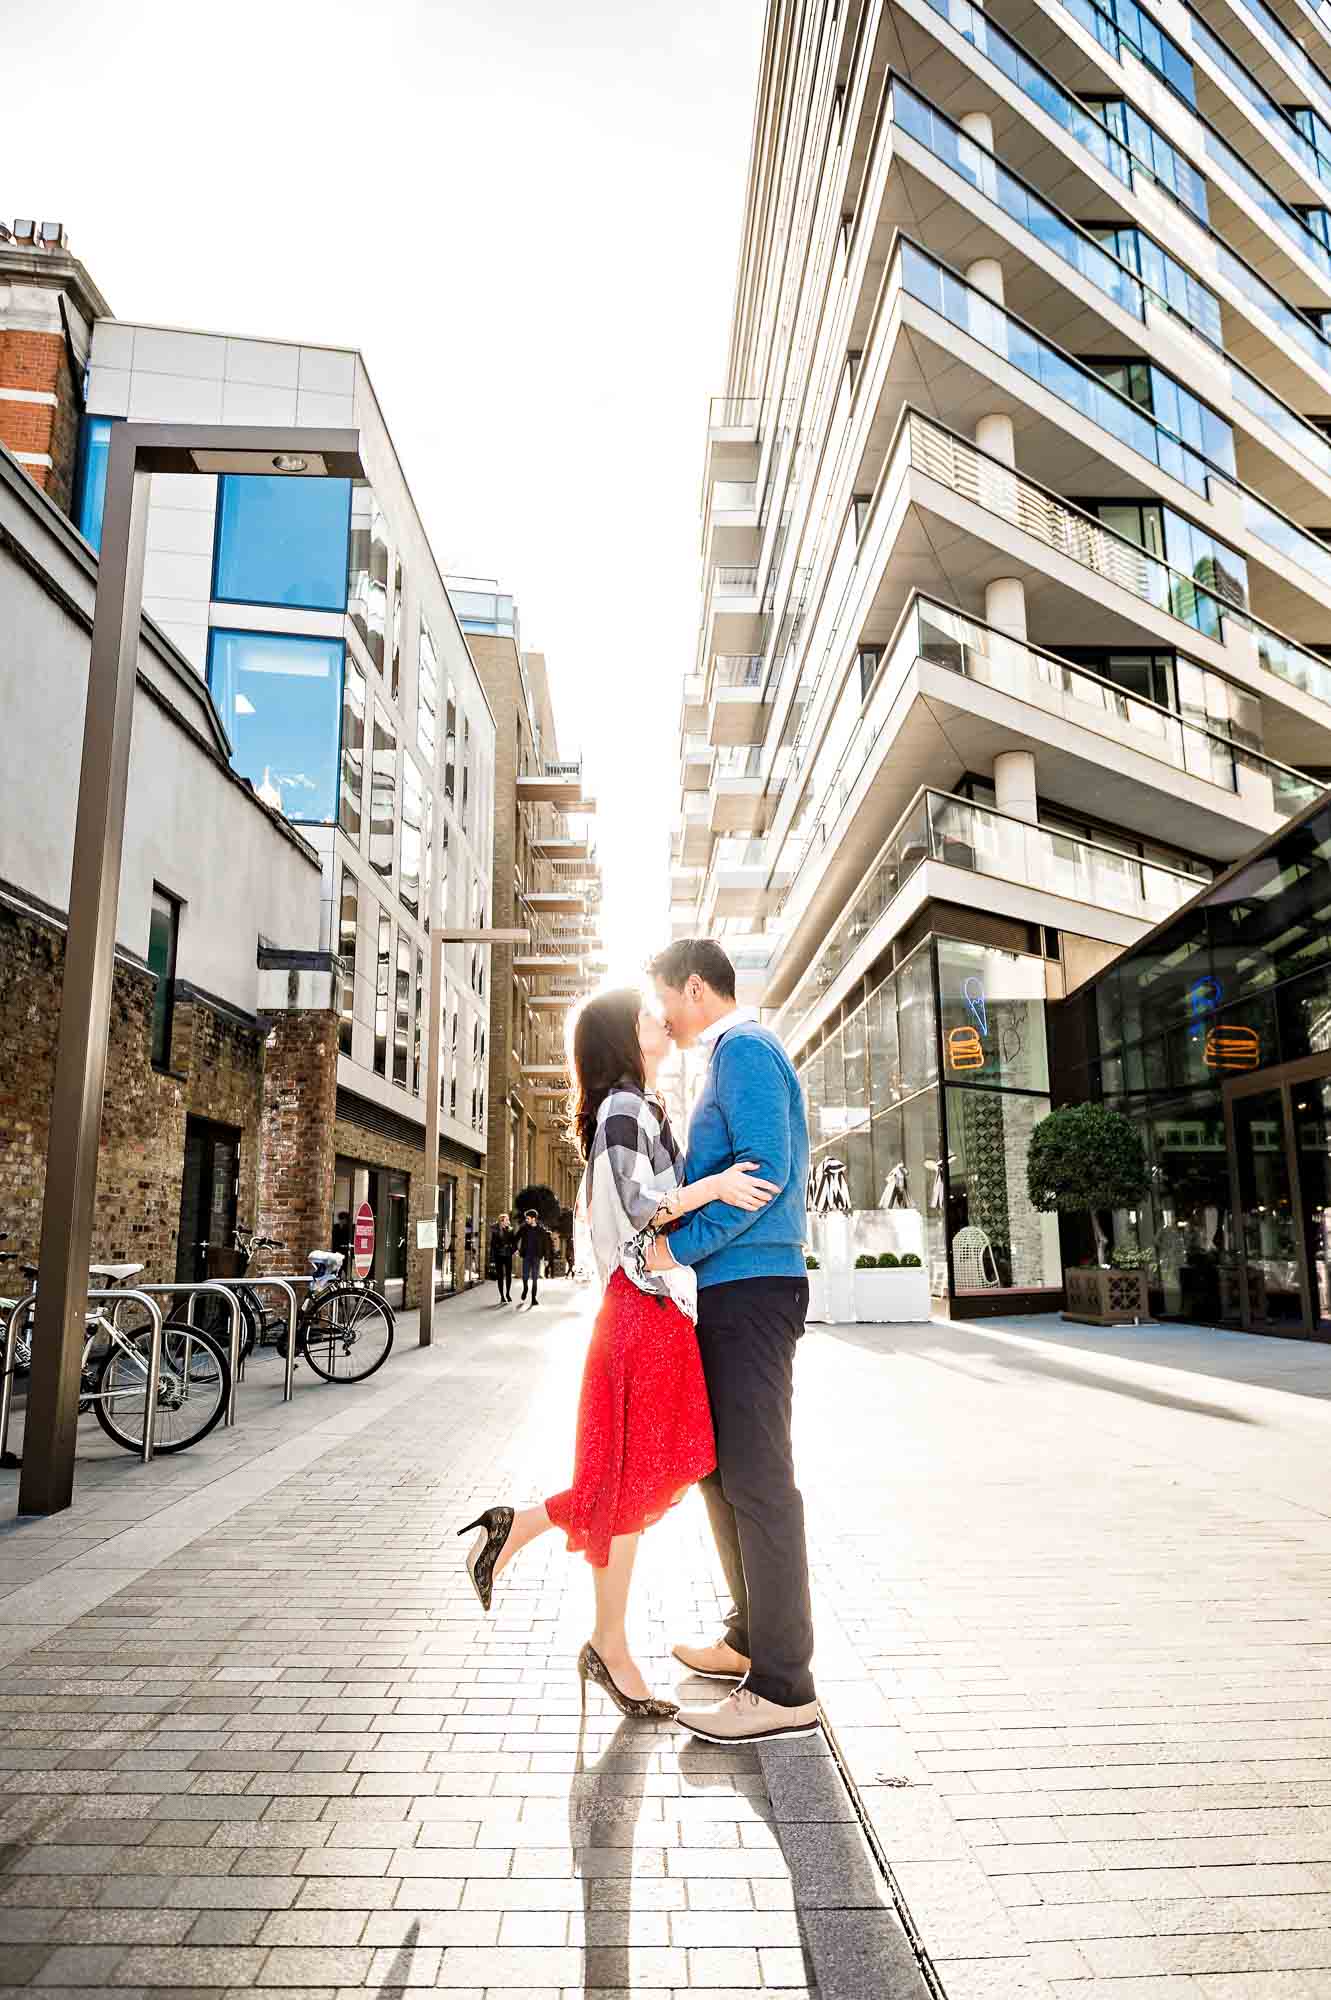 Couple kissing in London street with appartment block and the sun in the background